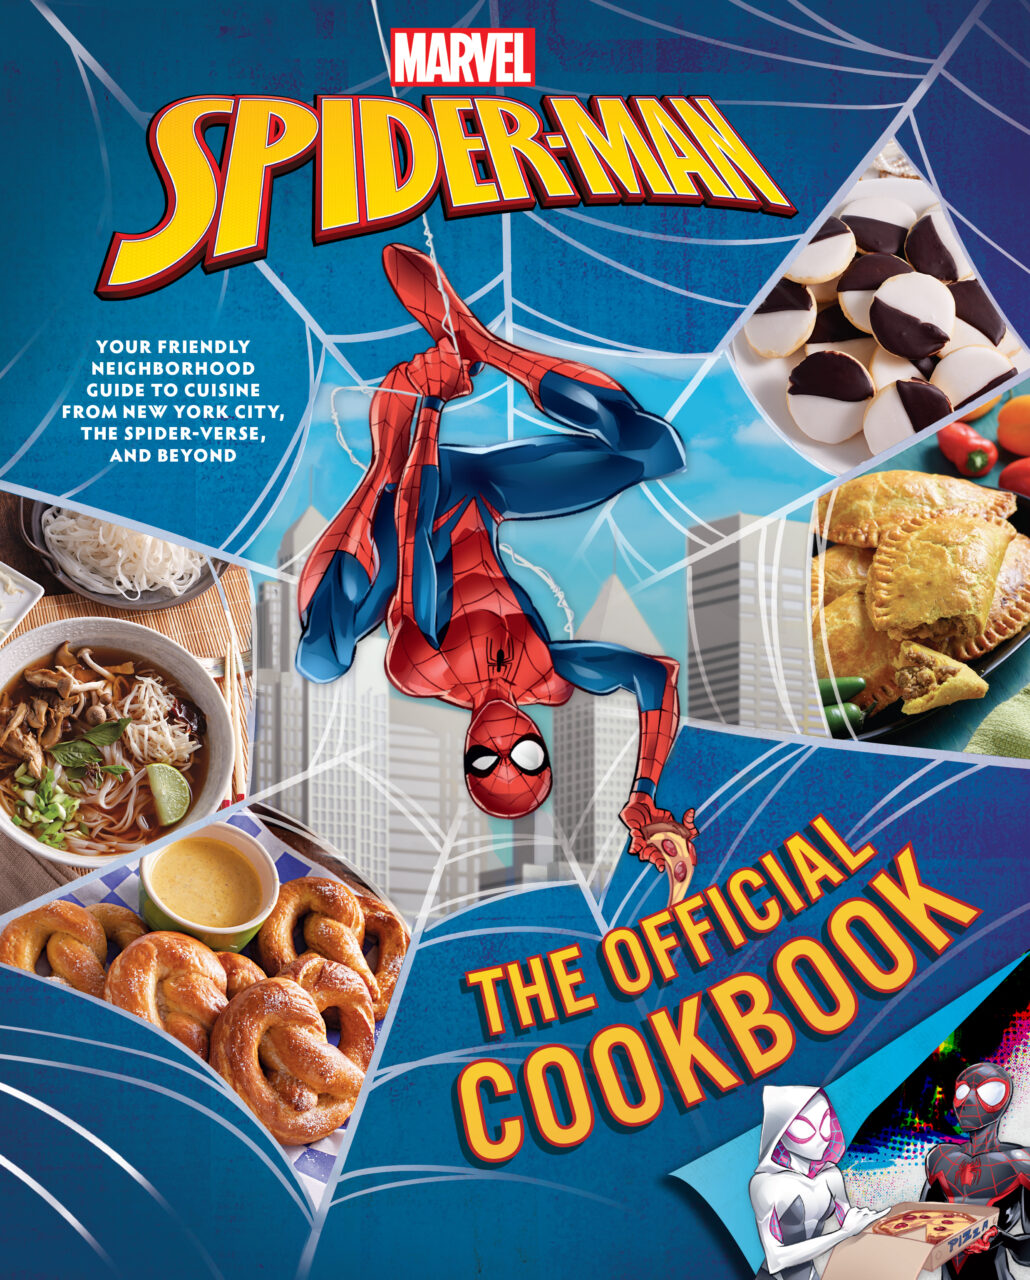 Marvel: Spider-Man: The Official Cookbook: Your Friendly Neighborhood Guide to Cuisine from NYC, the Spider-Verse & Beyond cover